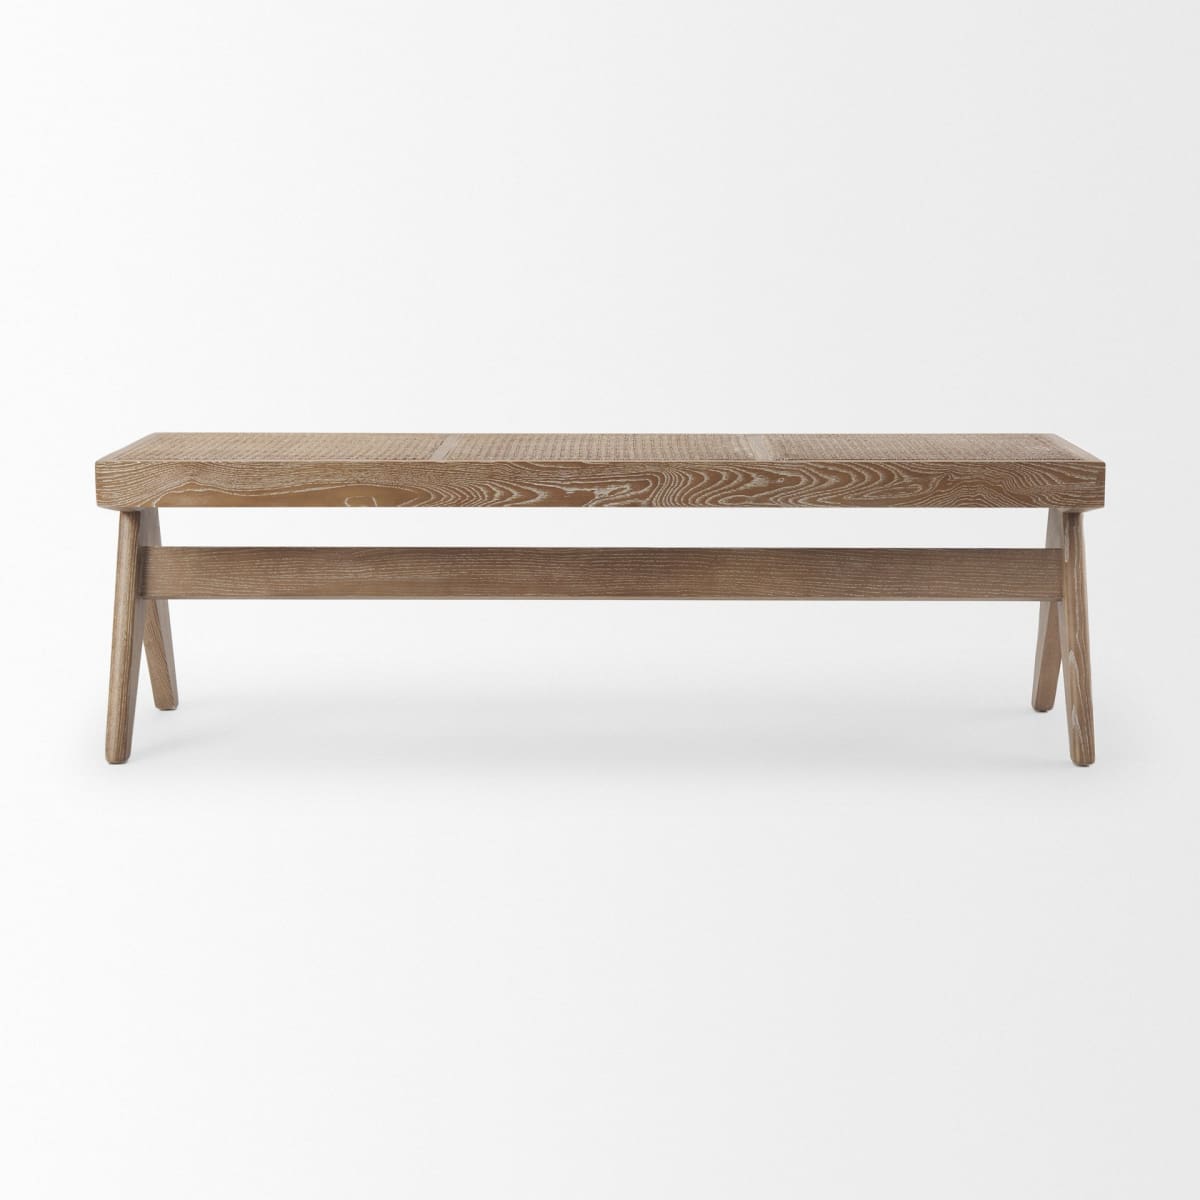 Arvin Bench Brown Wood - benches